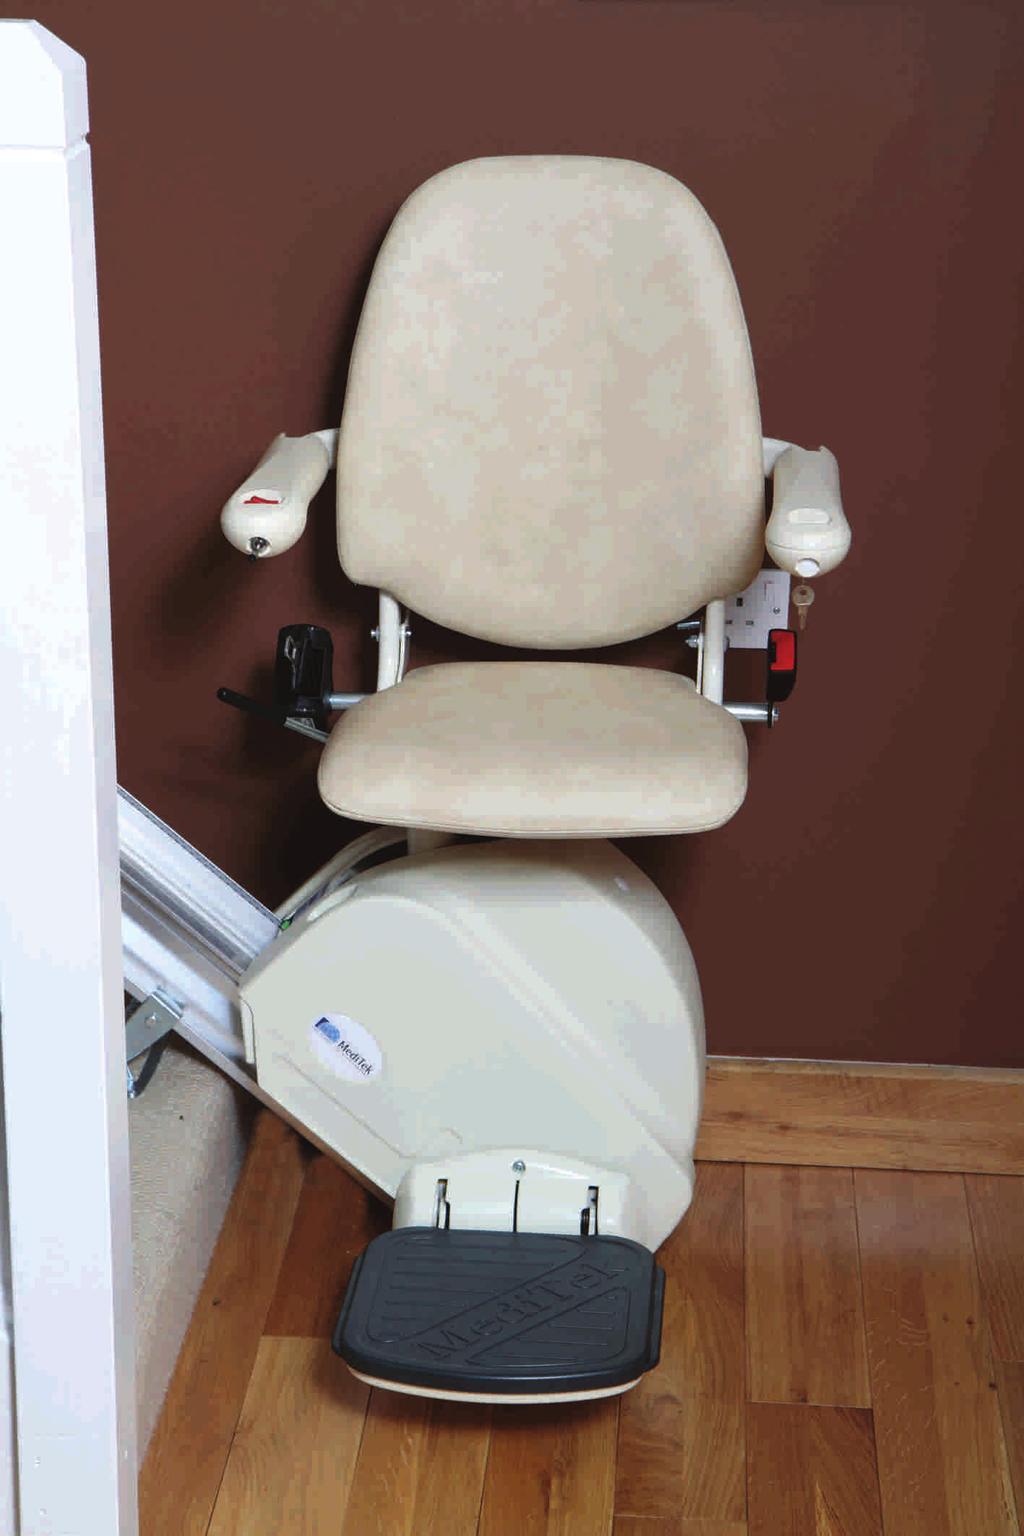 Everyone at MediTek understands the real difference assistive technologies, such as domestic stairlifts, can provide in helping to improve